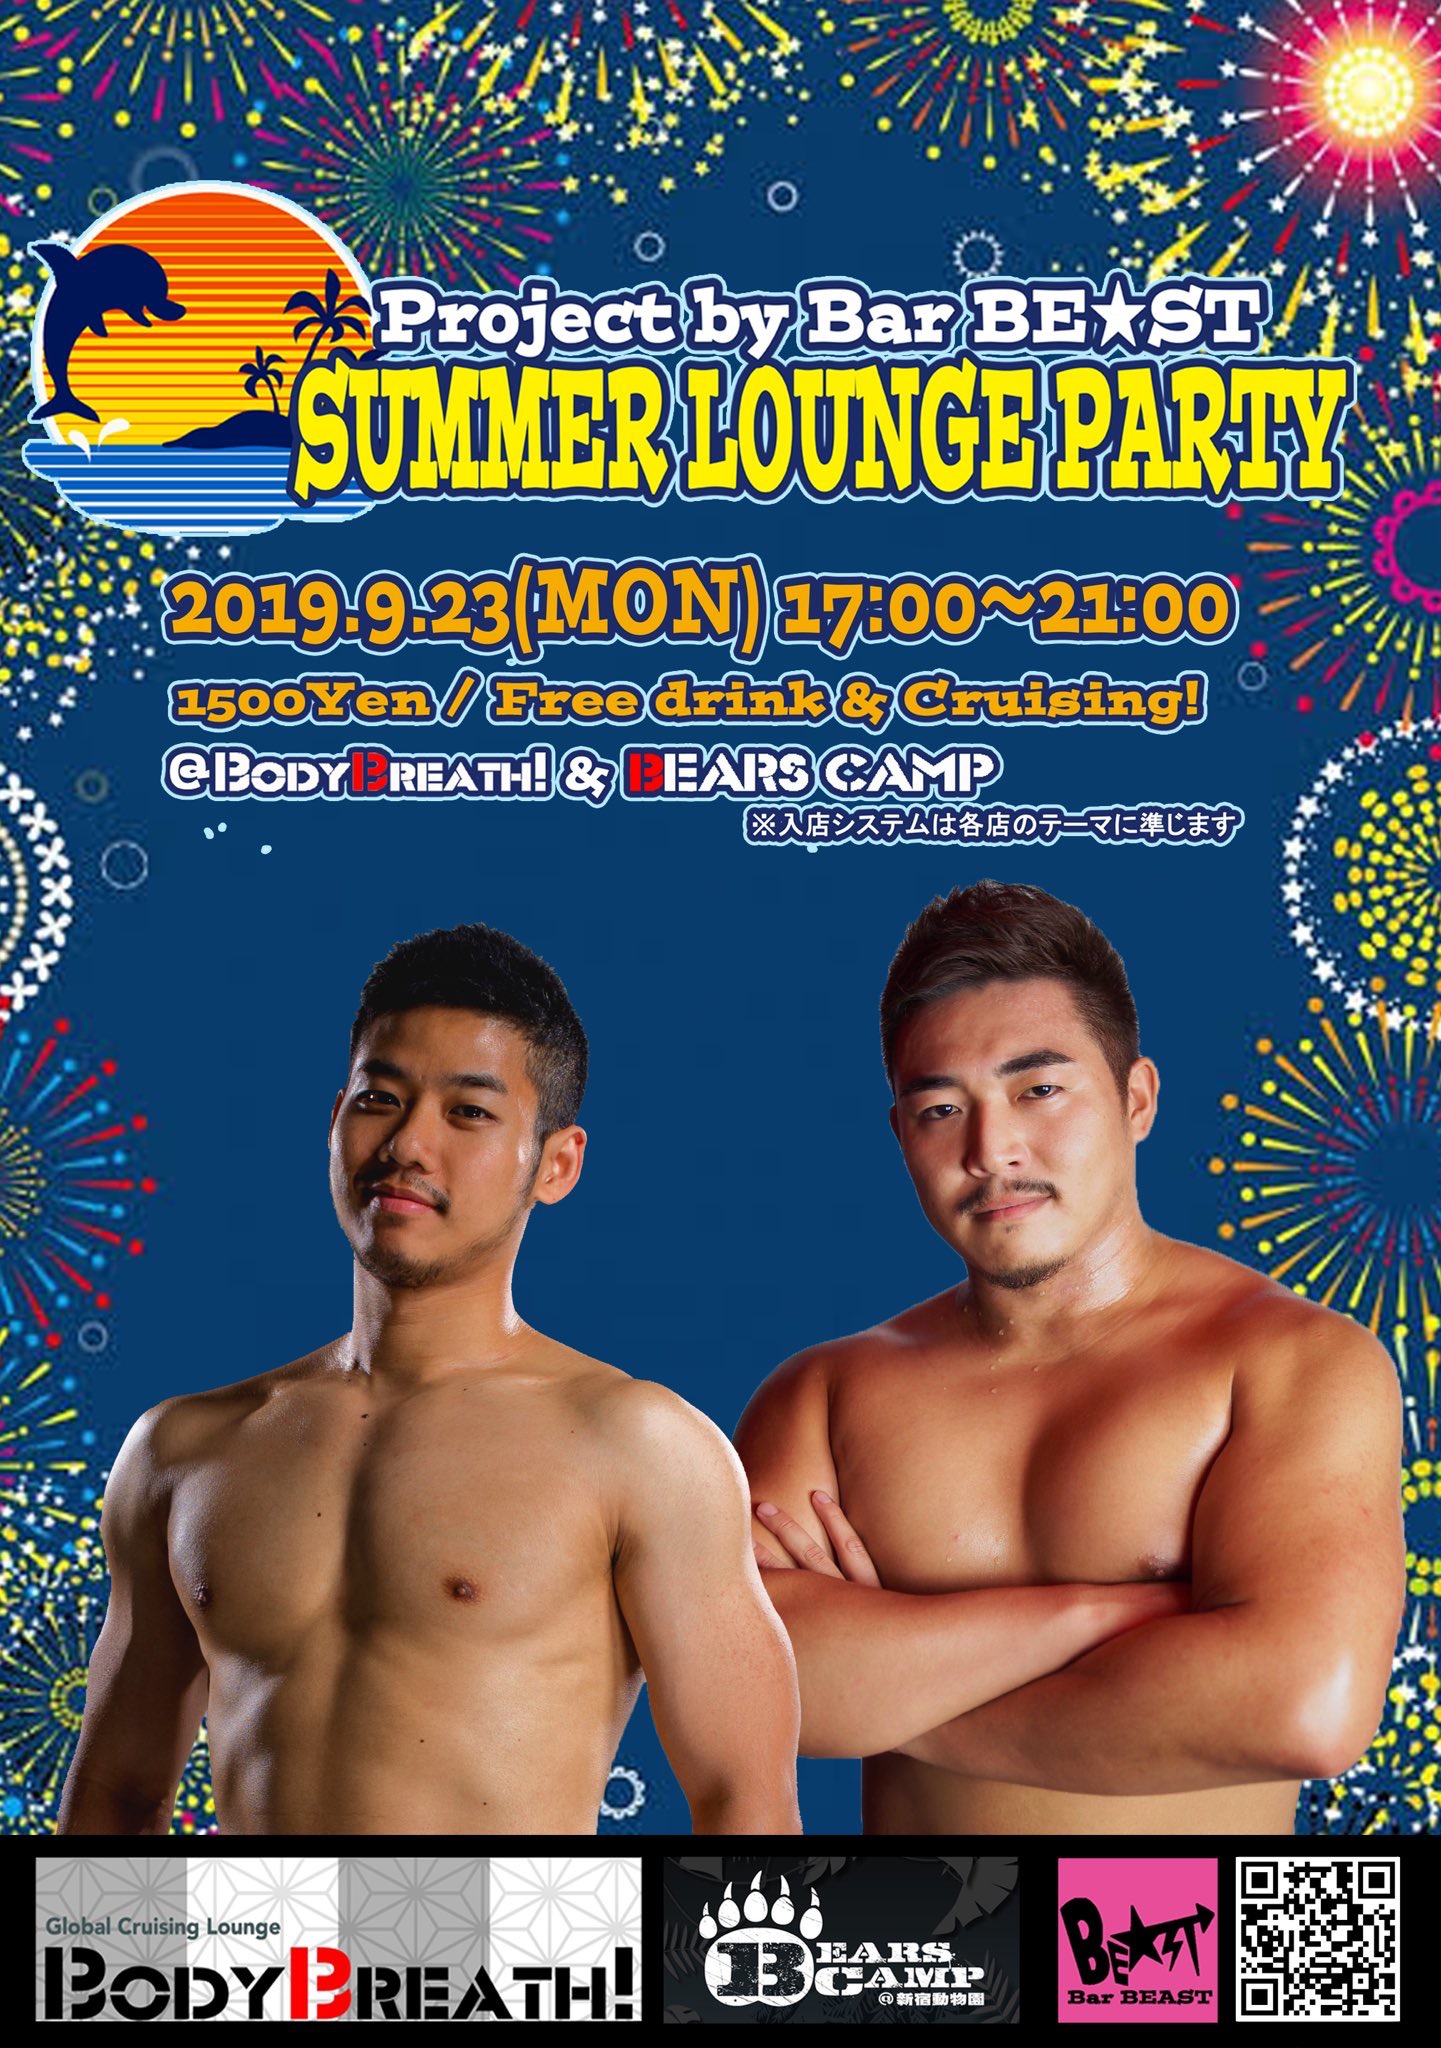 SUMMER LOUNGE PARTY 2019